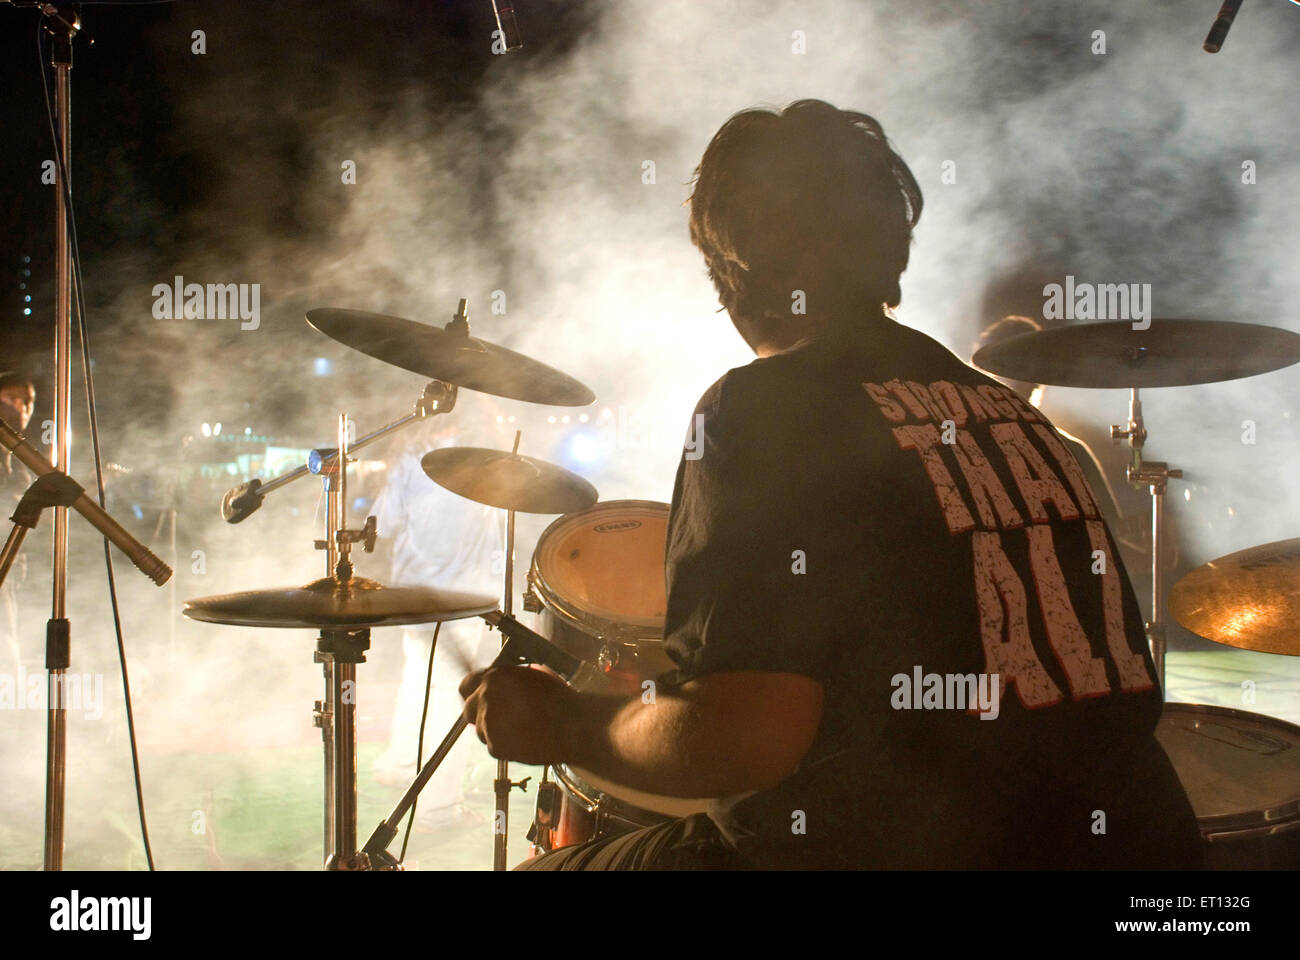 Rock show drummer playing musical instrument drums Stock Photo